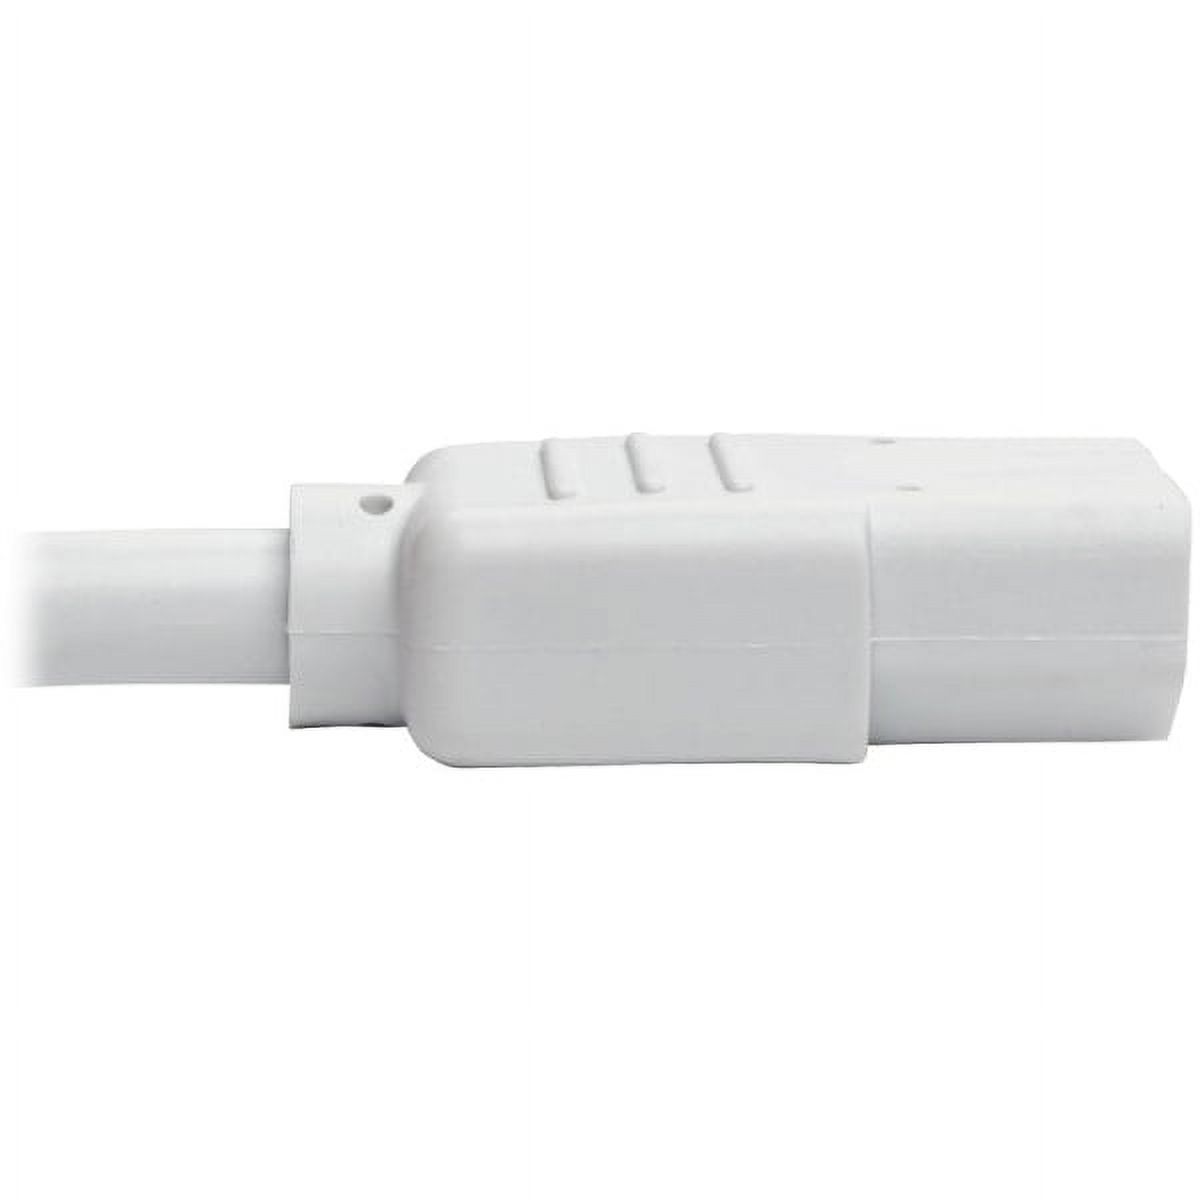 Eaton Tripp Lite Series Heavy-Duty PDU Power Cord, C13 to C14 - 15A, 250V, 14 AWG, 6 ft. (1.83 m), White - Power extension cable - IEC 60320 C14 to power IEC 60320 C13 - 6 ft - white - image 4 of 5